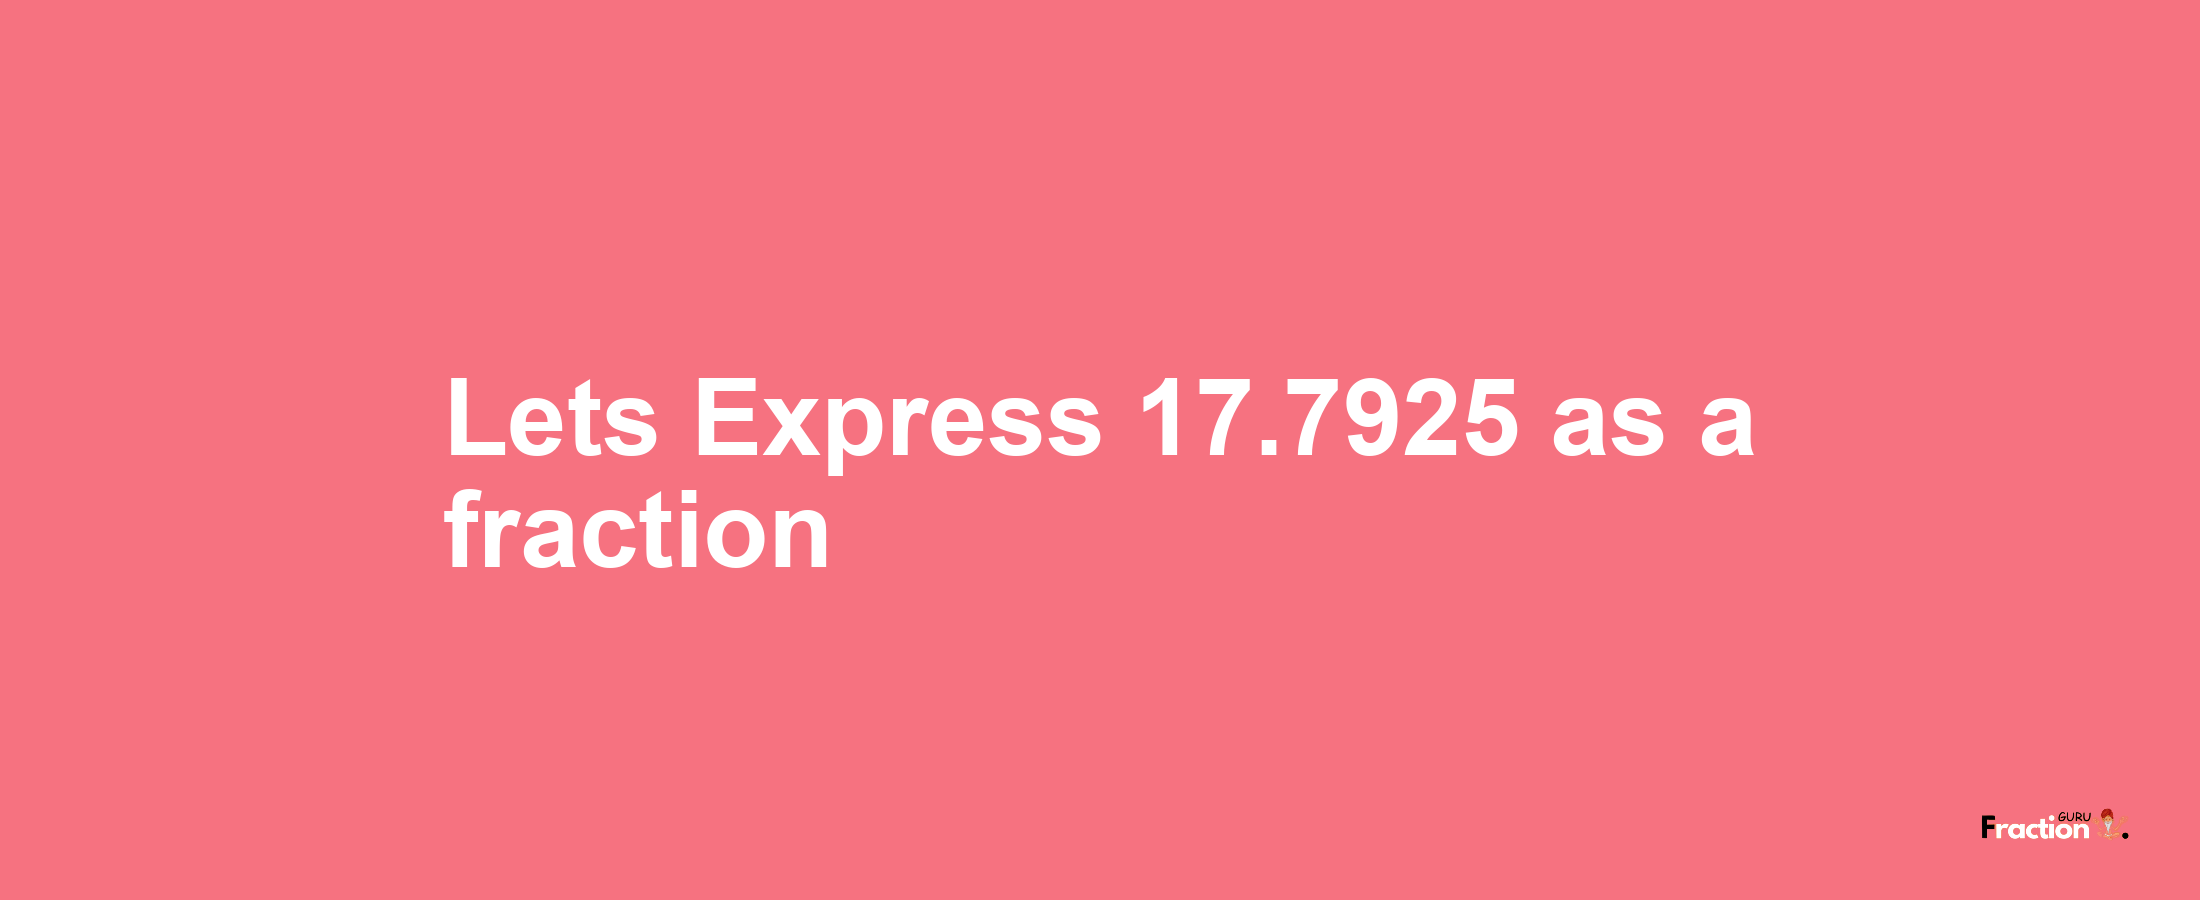 Lets Express 17.7925 as afraction